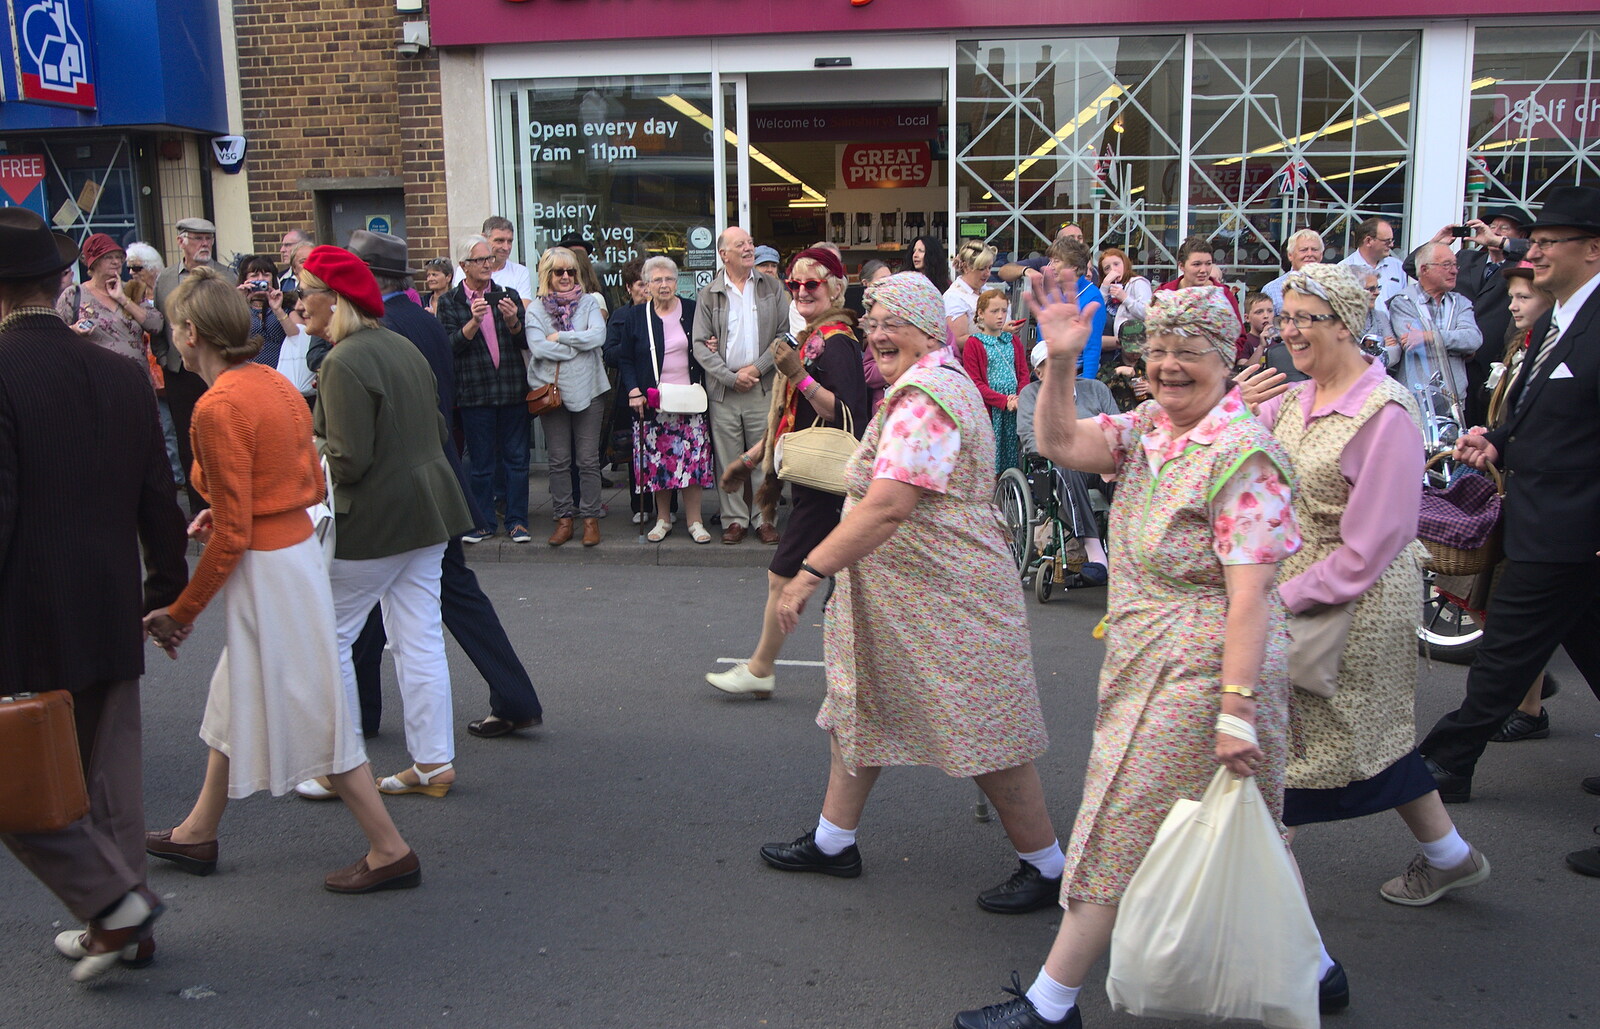 A group of 1940s housewives in the parade from A Steamy 1940s Day Out, Holt and Sheringham, Norfolk - 20th September 2015